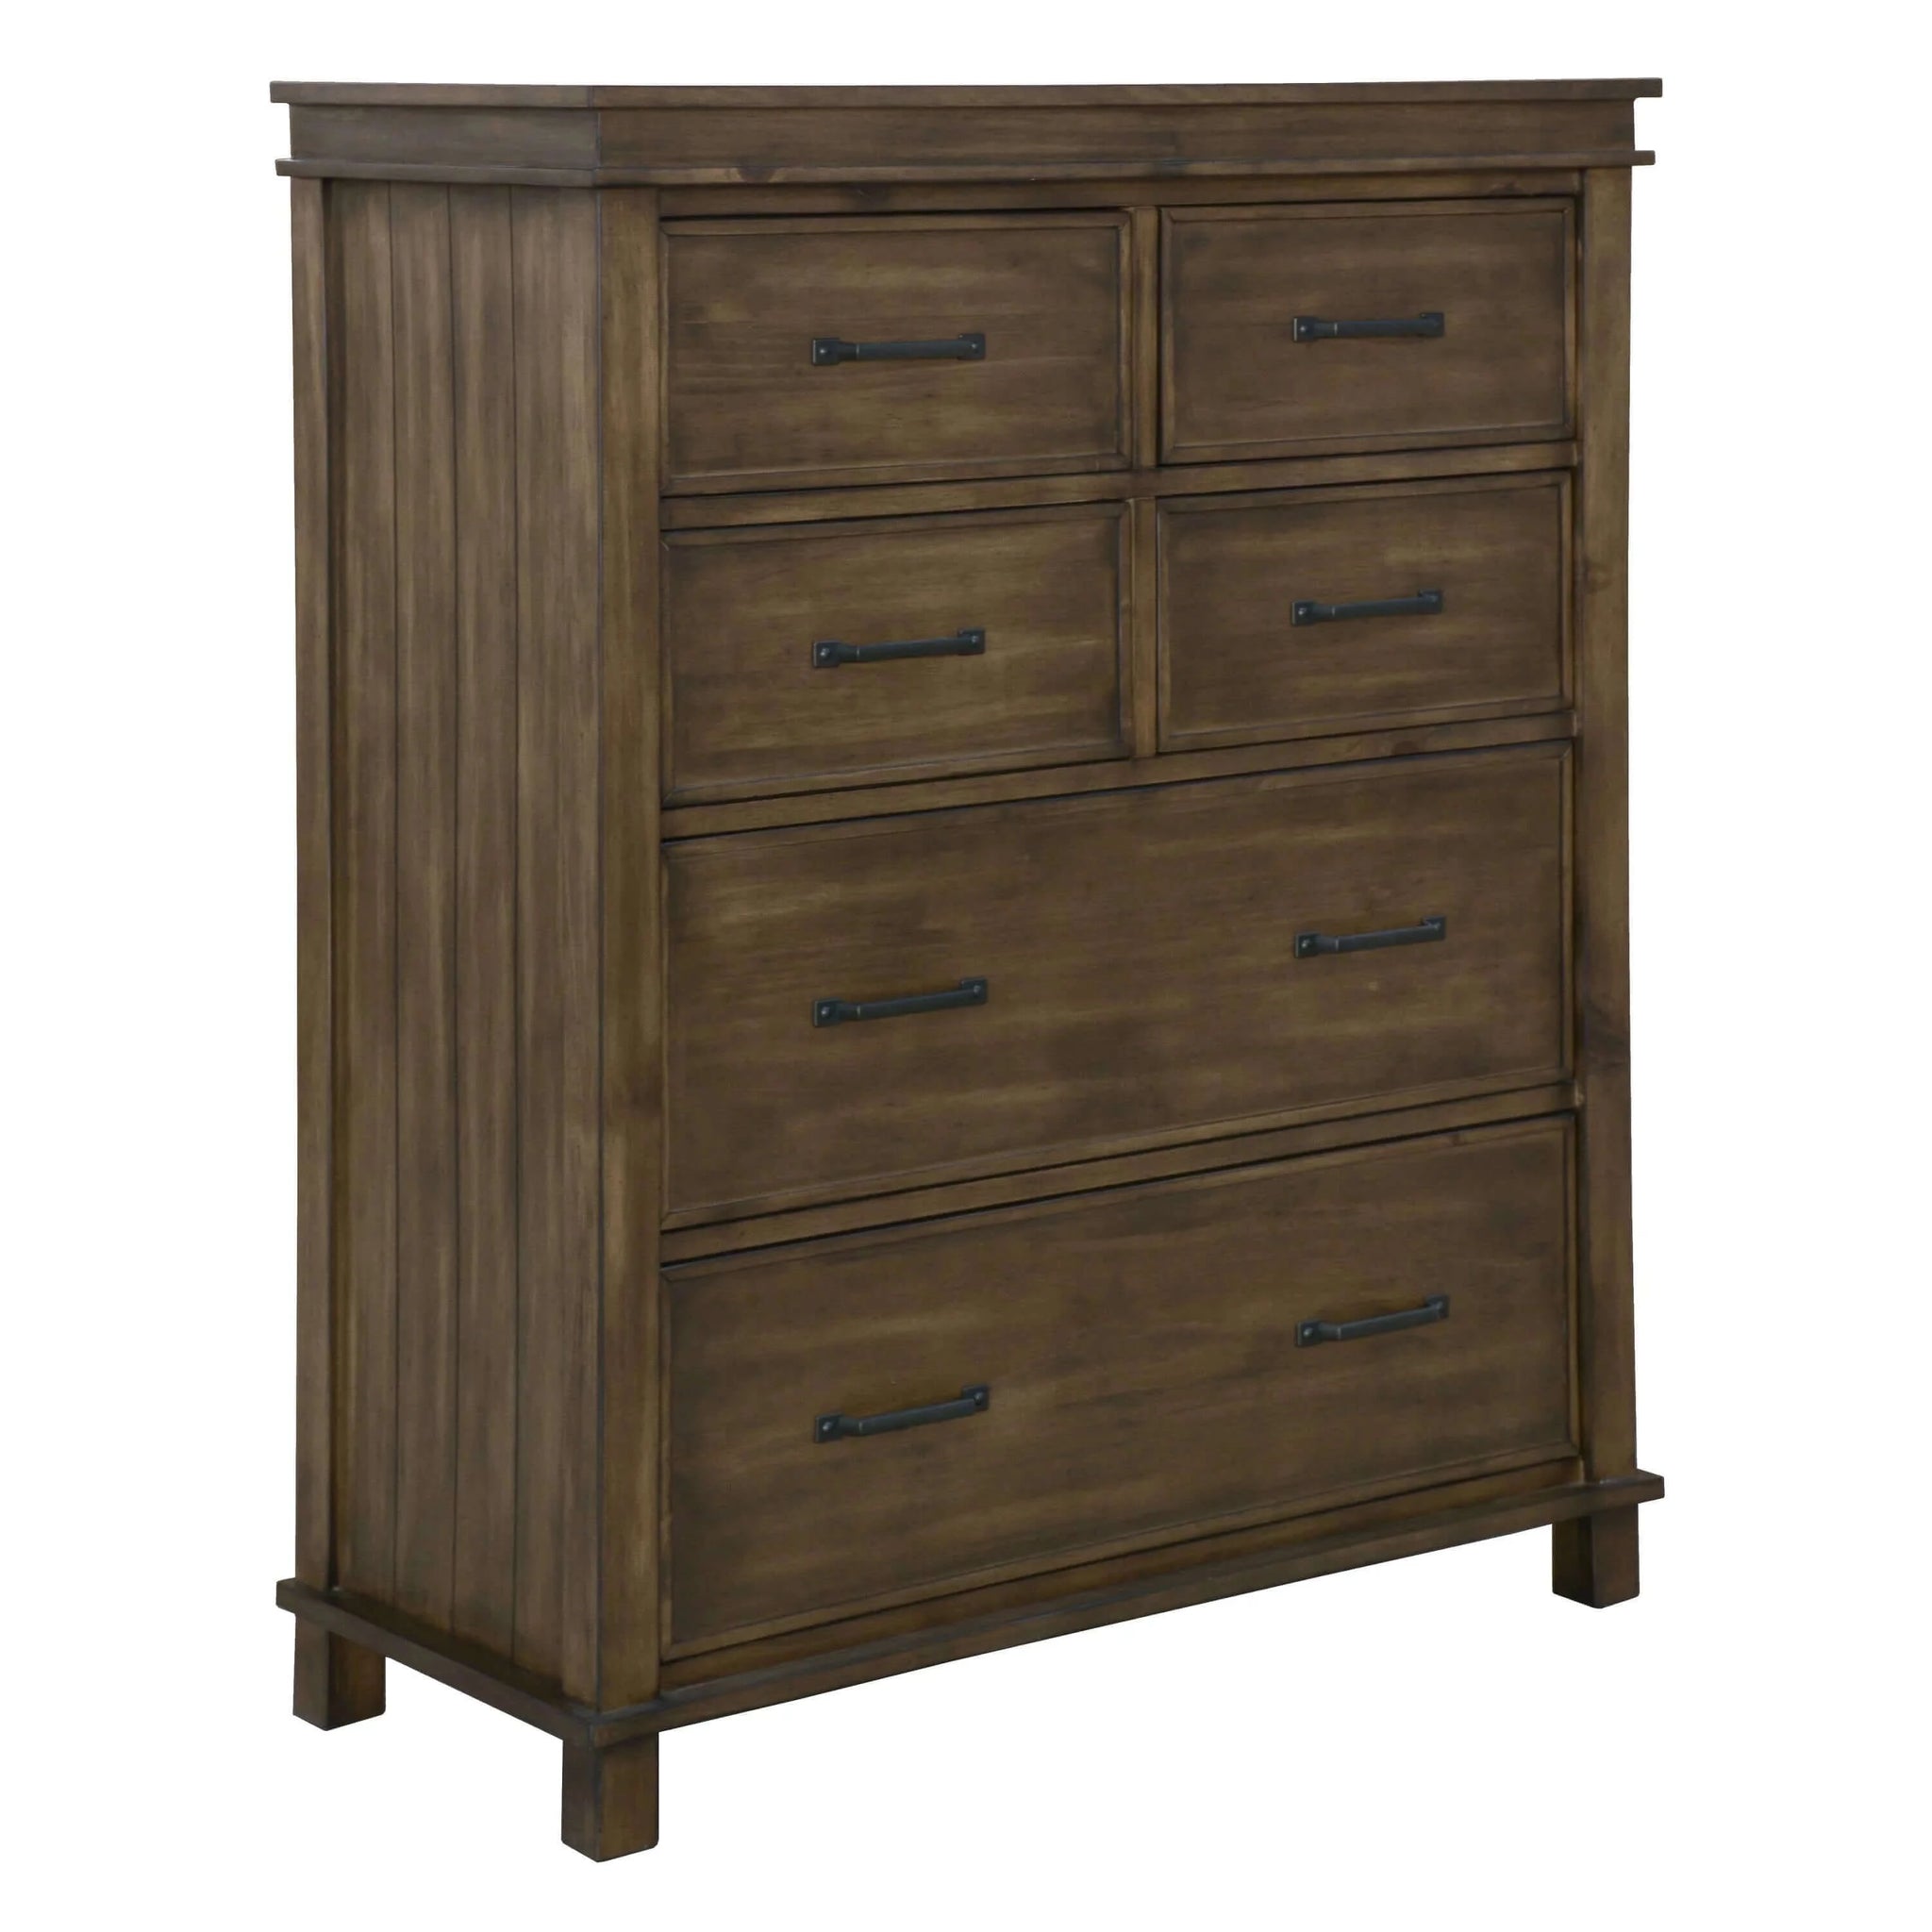 Lily Tallboy 6 Chest of Drawers Solid Pine Wood Bed Storage Cabinet -Rustic Grey-Upinteriors